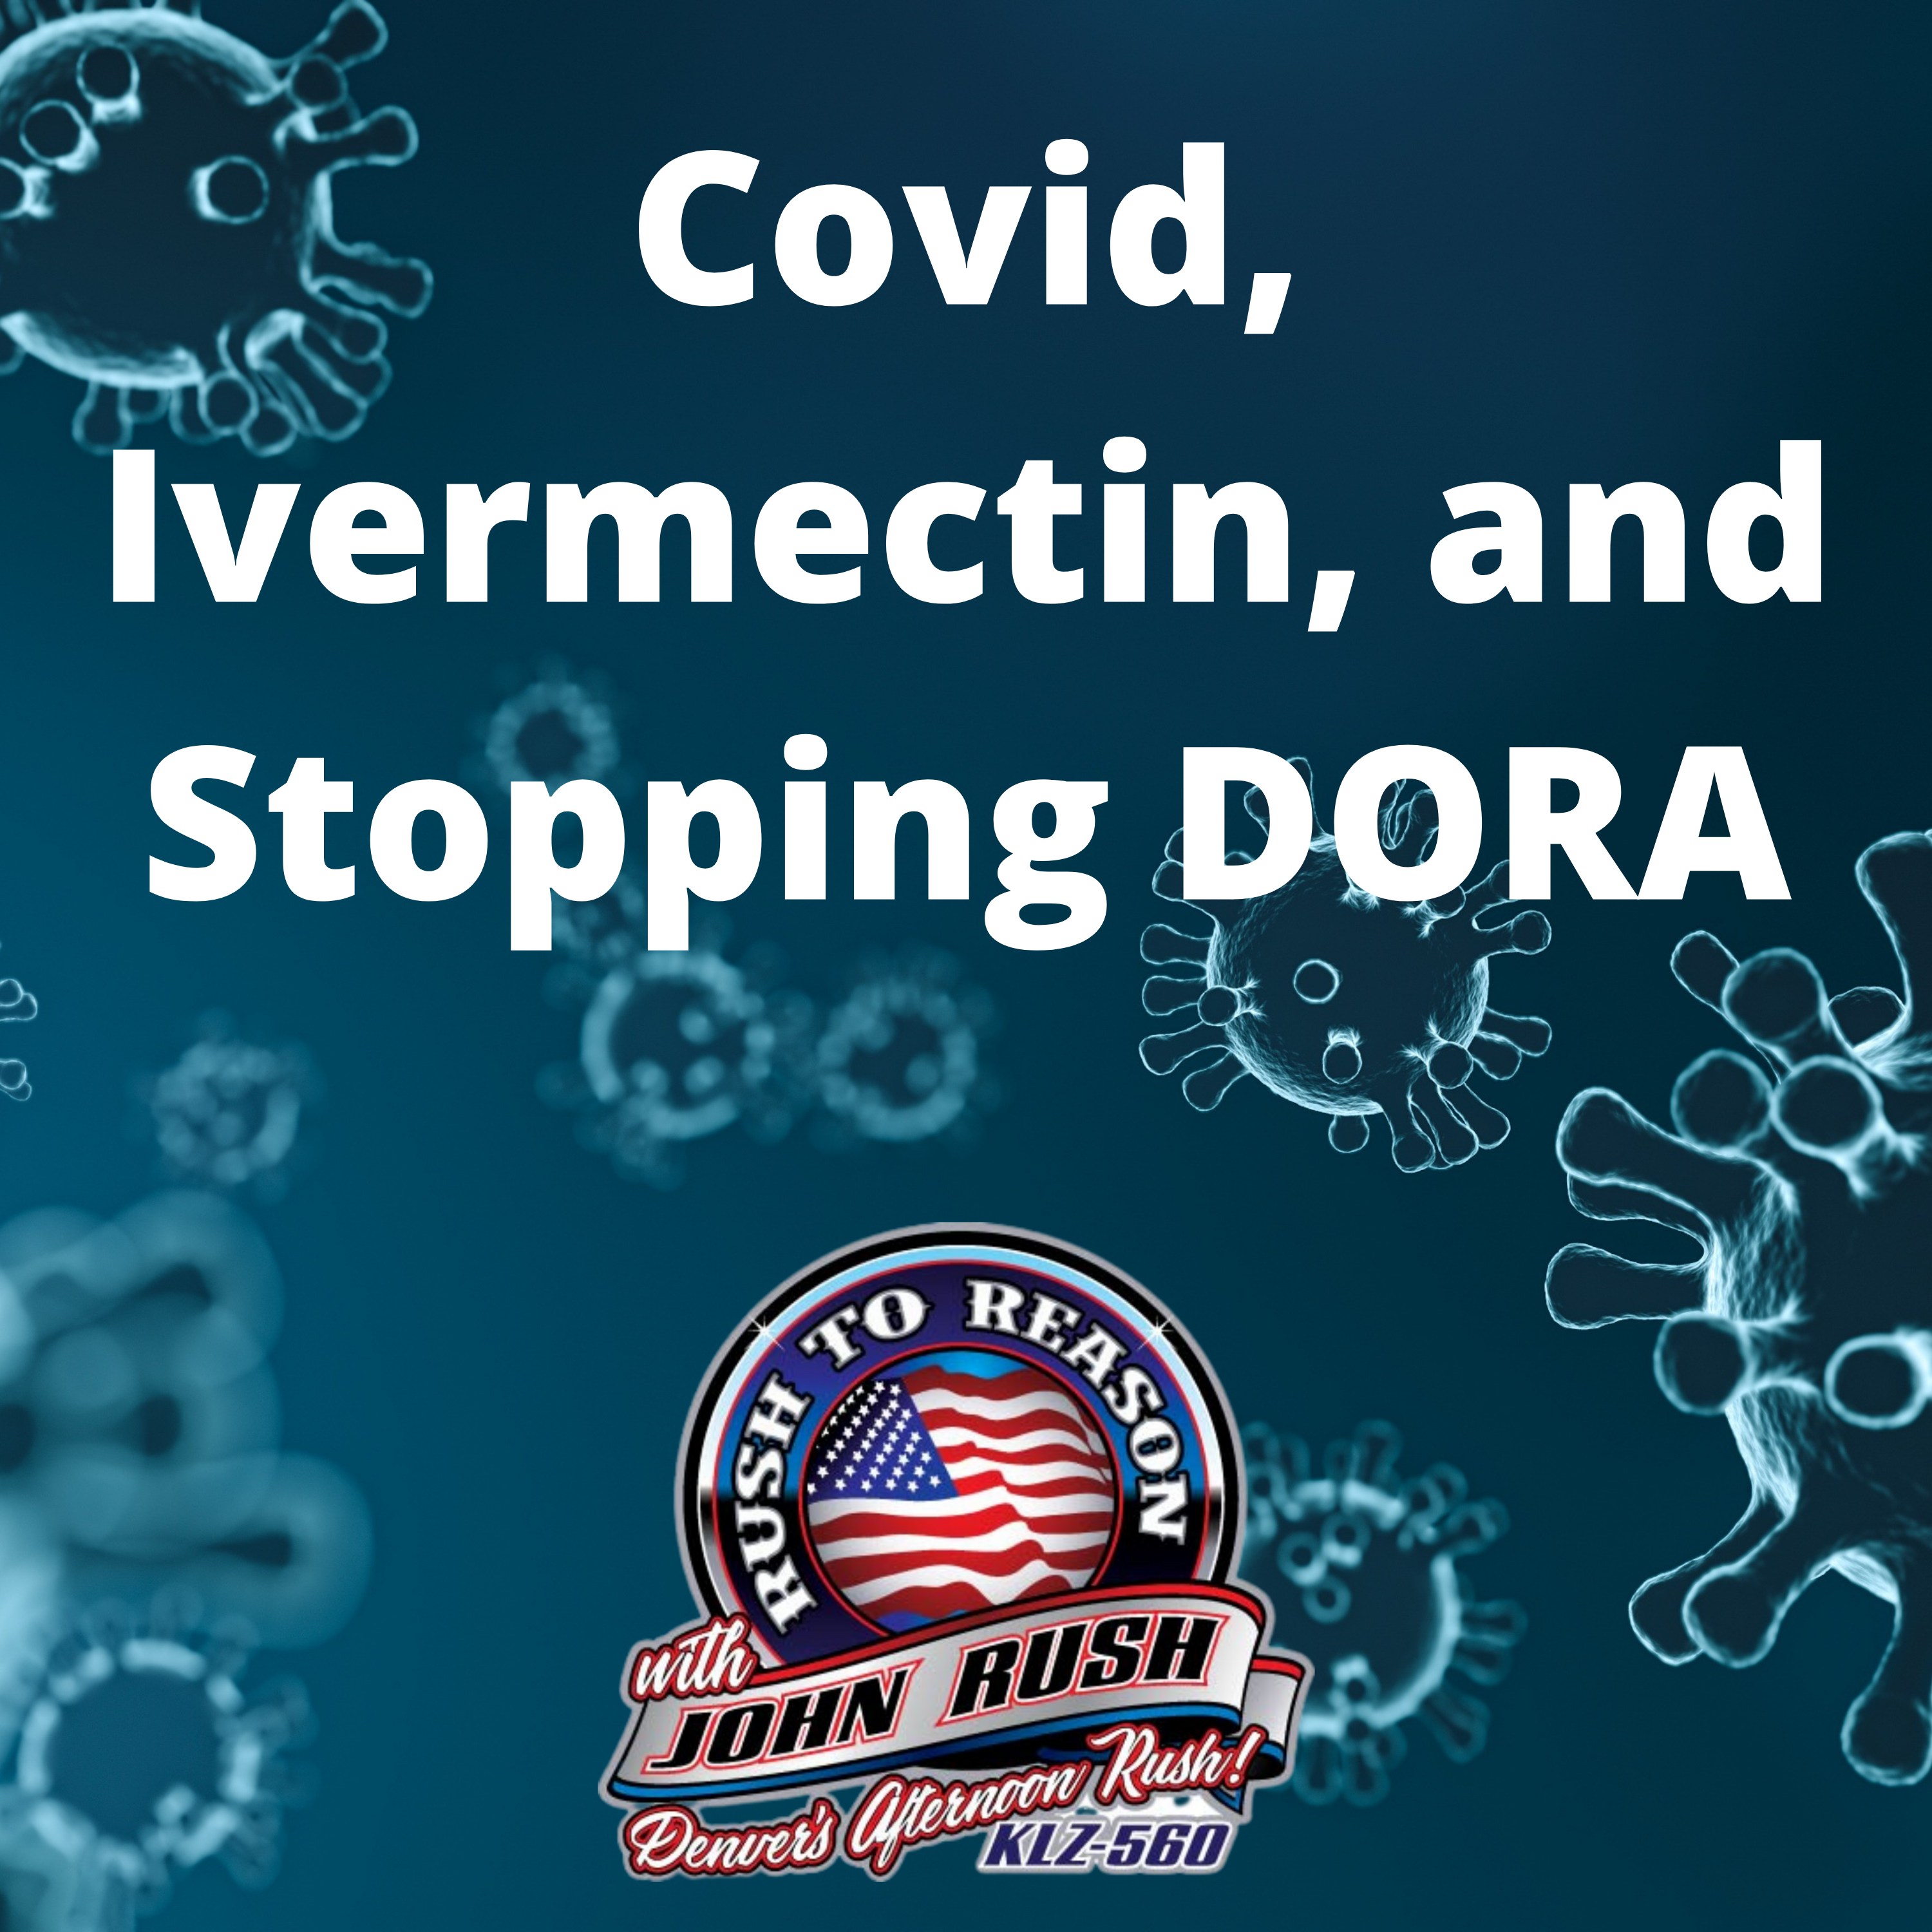 Covid, Ivermectin, and Stopping DORA